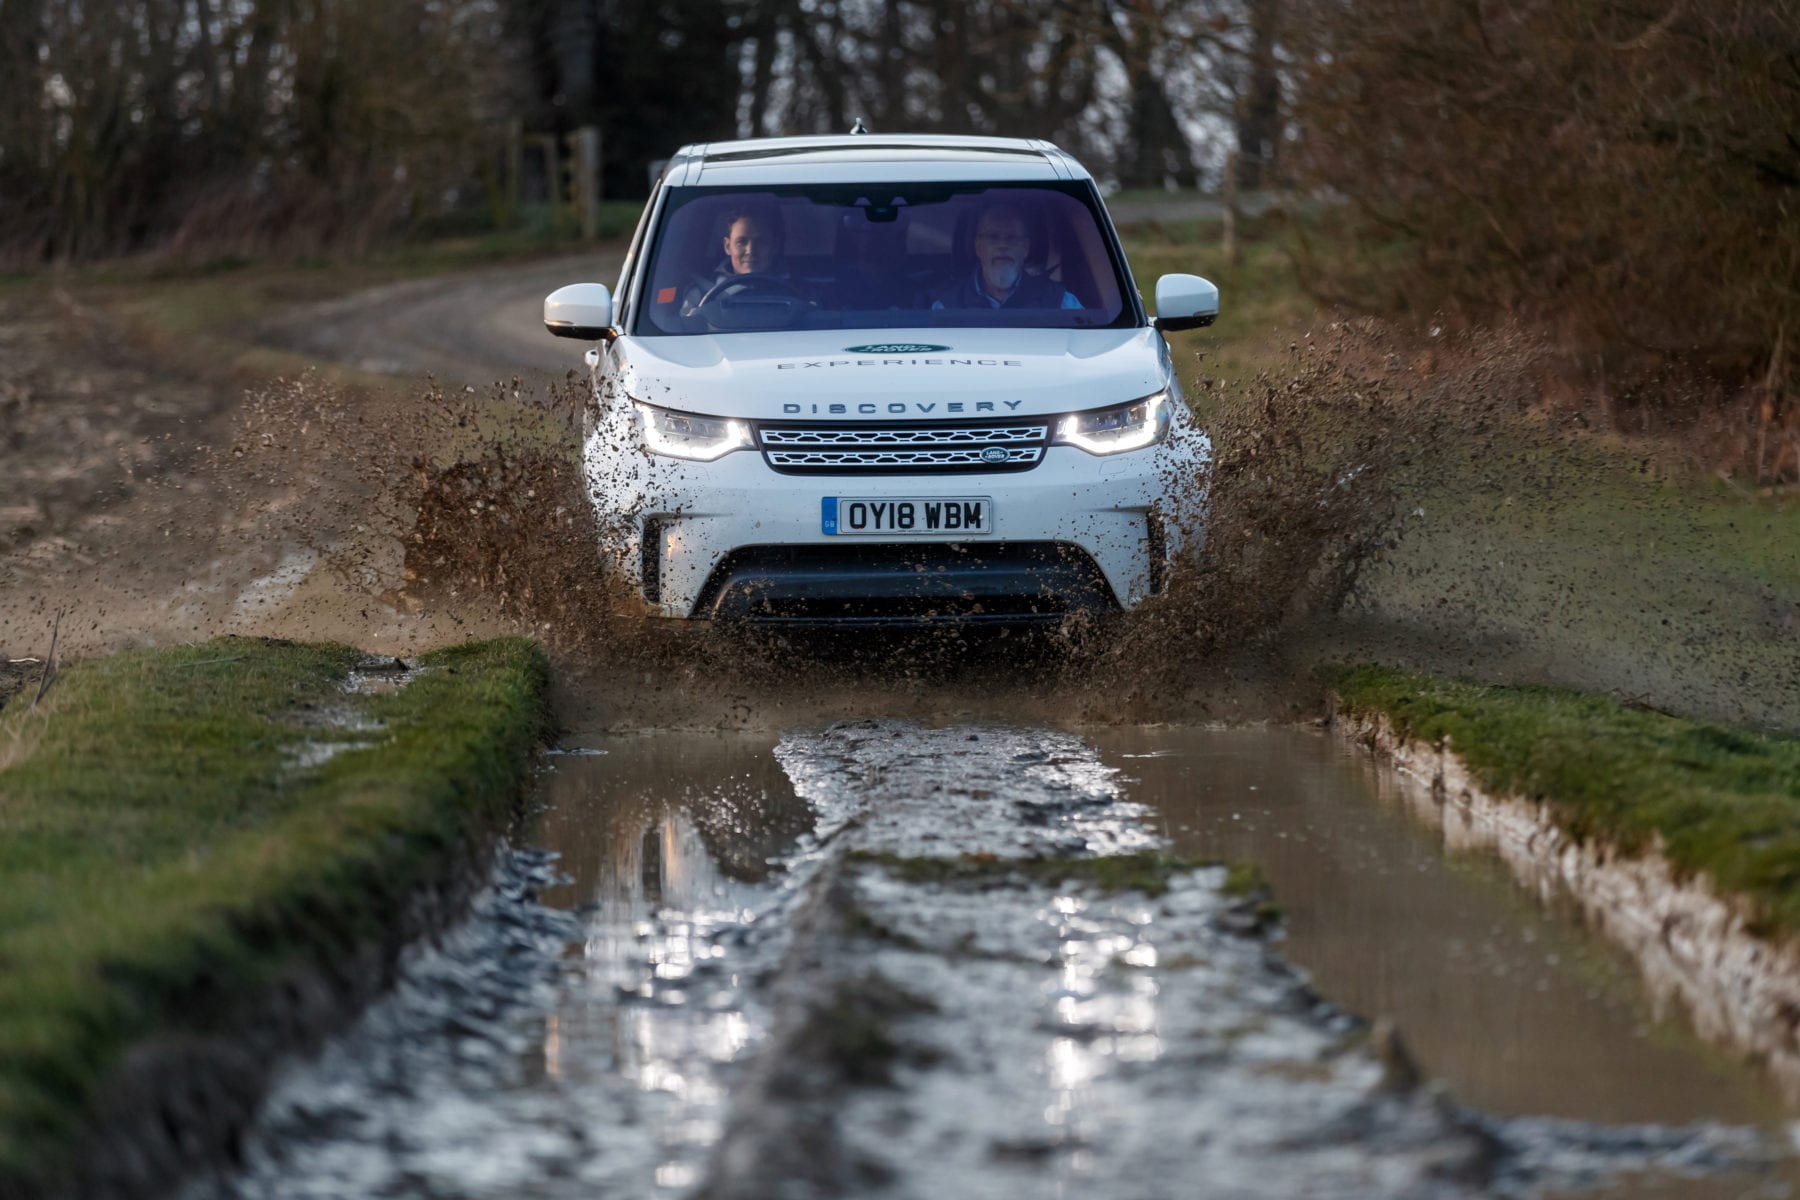 Land Rover Discovery Mobile Malaria Project